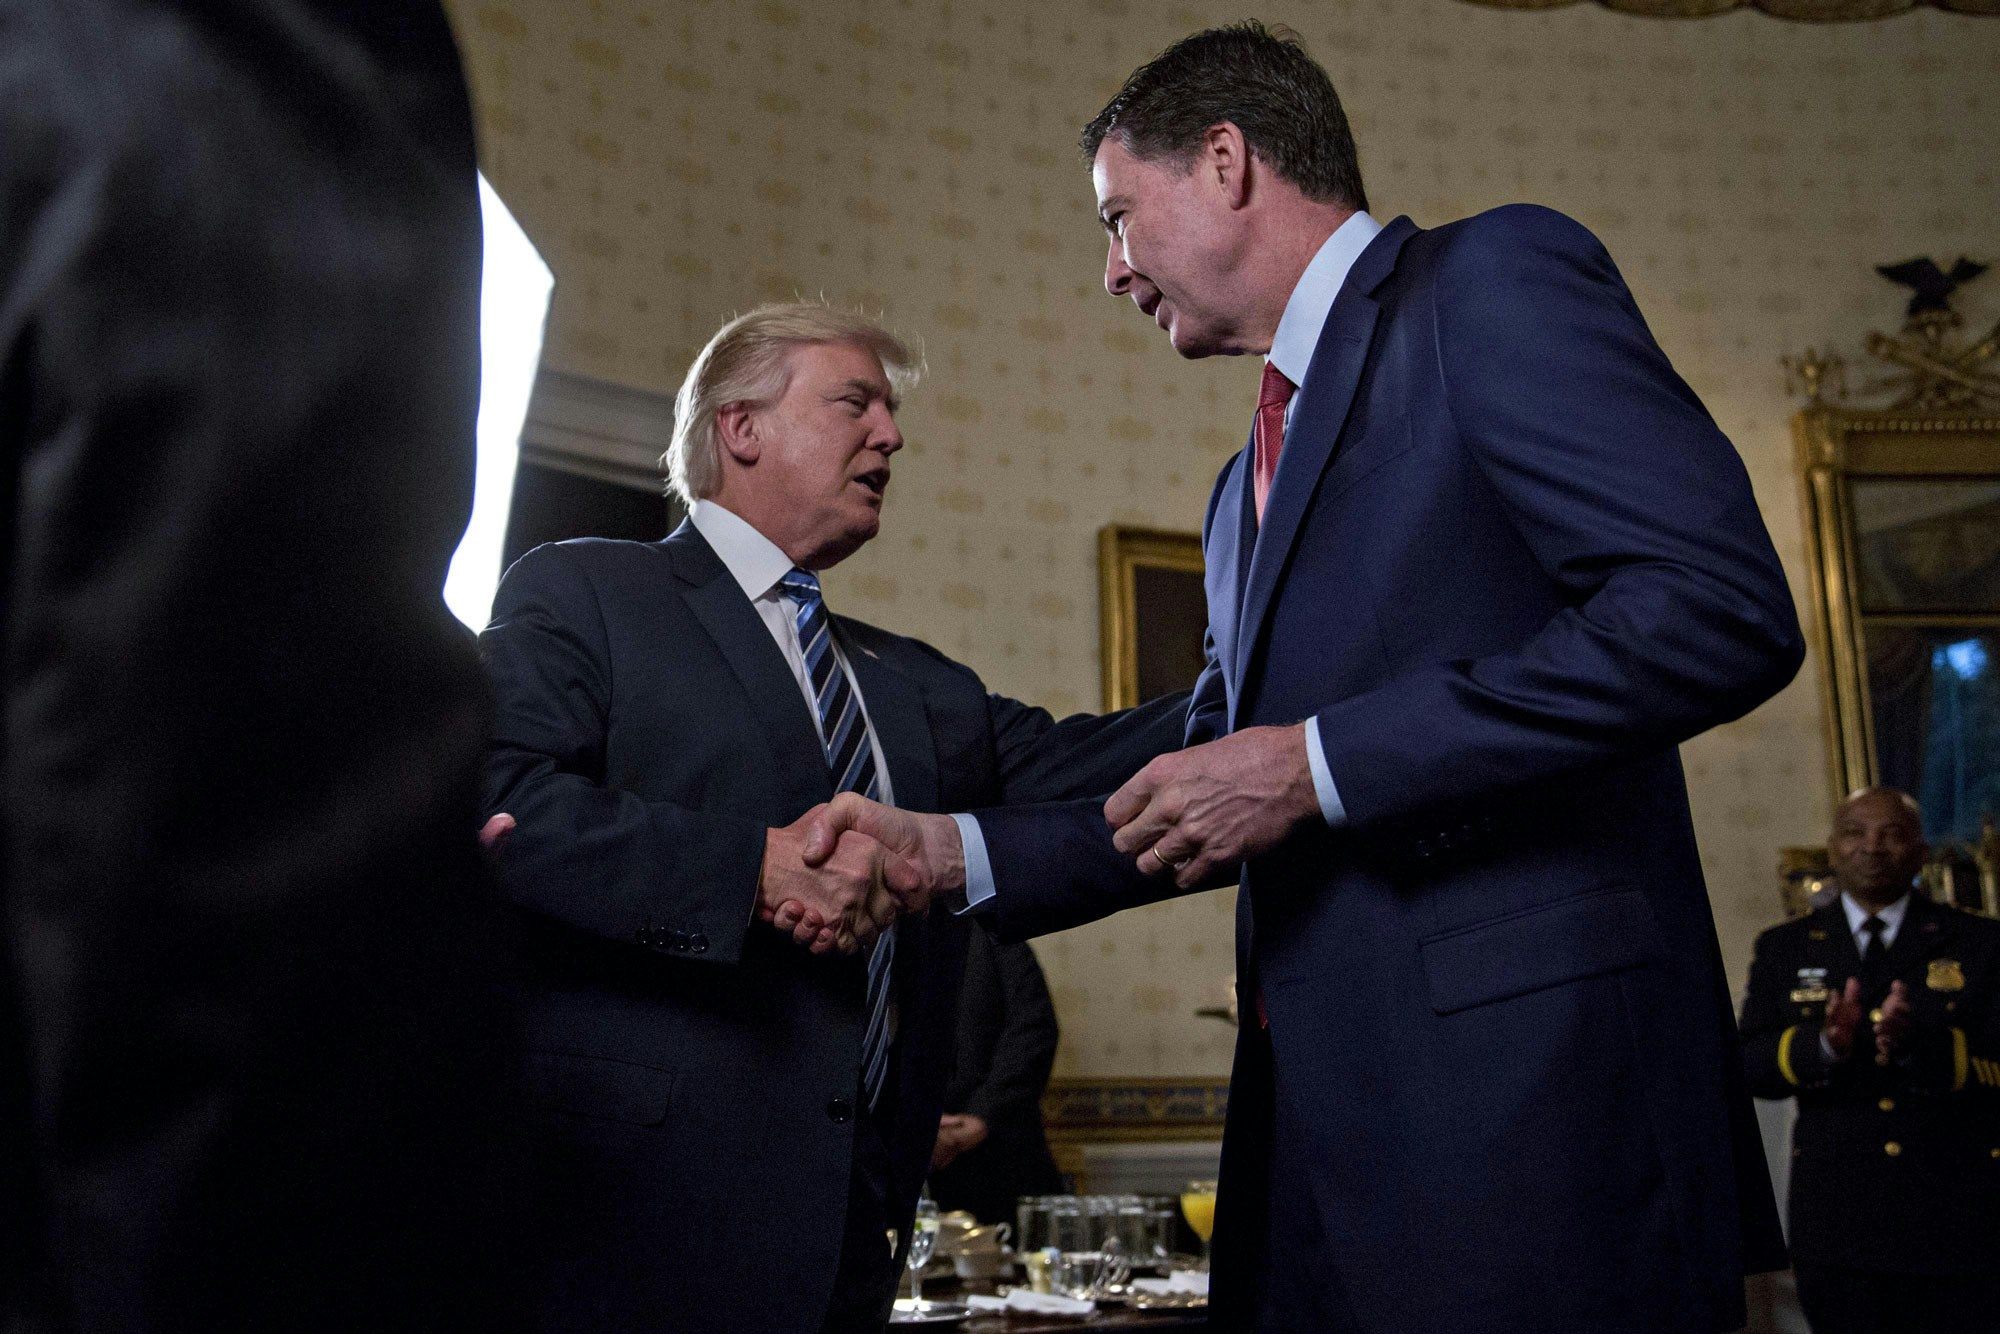 U.S. President Donald Trump, center, shakes hands with James Comey, director of the Federal Bureau of Investigation (FBI), during an Inaugural Law Enforcement Officers and First Responders Reception in the Blue Room of the White House in Washington, D.C., U.S., on Sunday, Jan. 22, 2017. Trump today mocked protesters who gathered for large demonstrations across the U.S. and the world on Saturday to signal discontent with his leadership, but later offered a more conciliatory tone, saying he recognized such marches as a hallmark of our democracy. Photographer: Andrew Harrer/Bloomberg via Getty Images